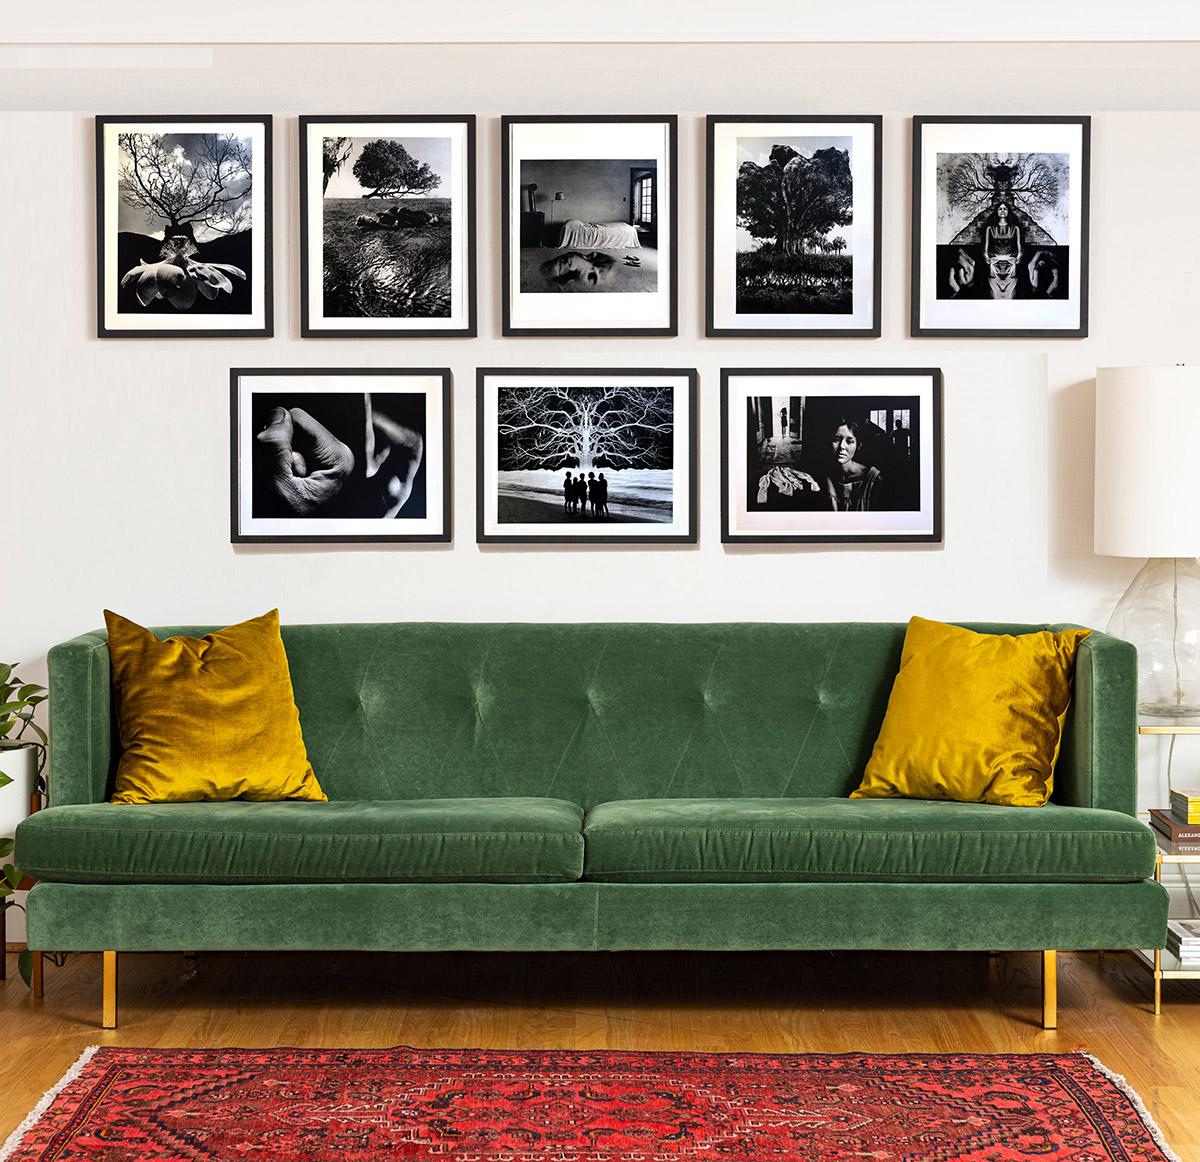 A set of 8 lithographs by surreal photographer Jerry Uelsman.  Each image of various sizes is framed and matted to fit a 16" x 20" archival black frame presentation, which can be arranged in a variety of ways.

Born in Detroit on June 11, 1934,